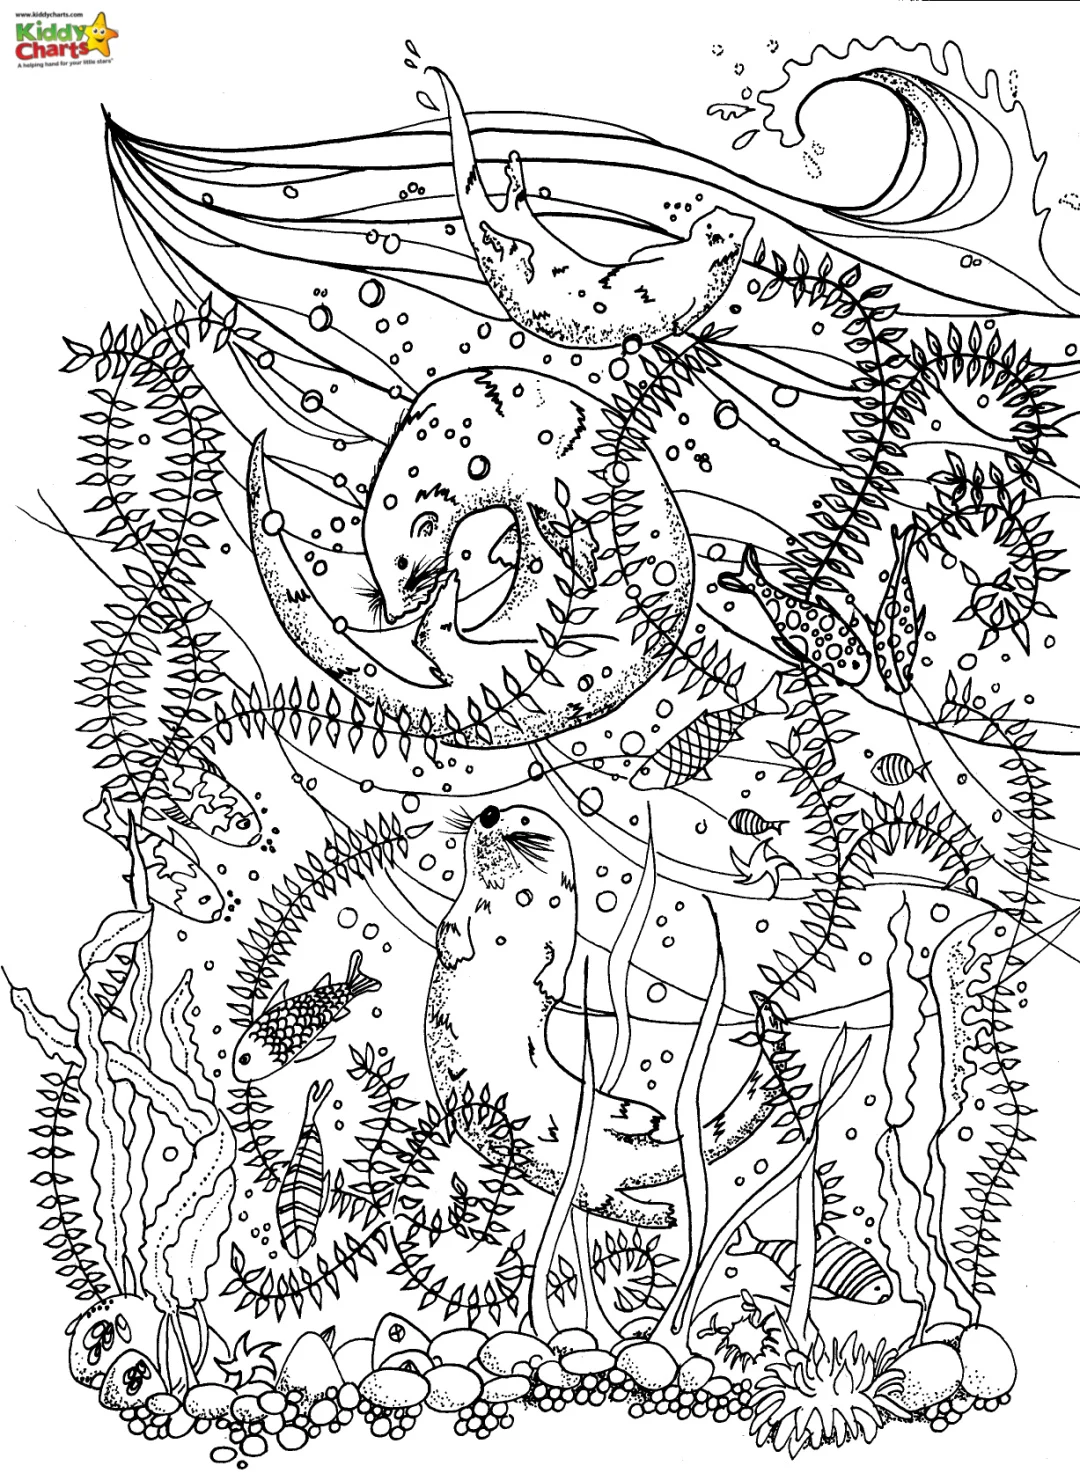 Sea dragon coloring page with a seal, fish and sea grass.